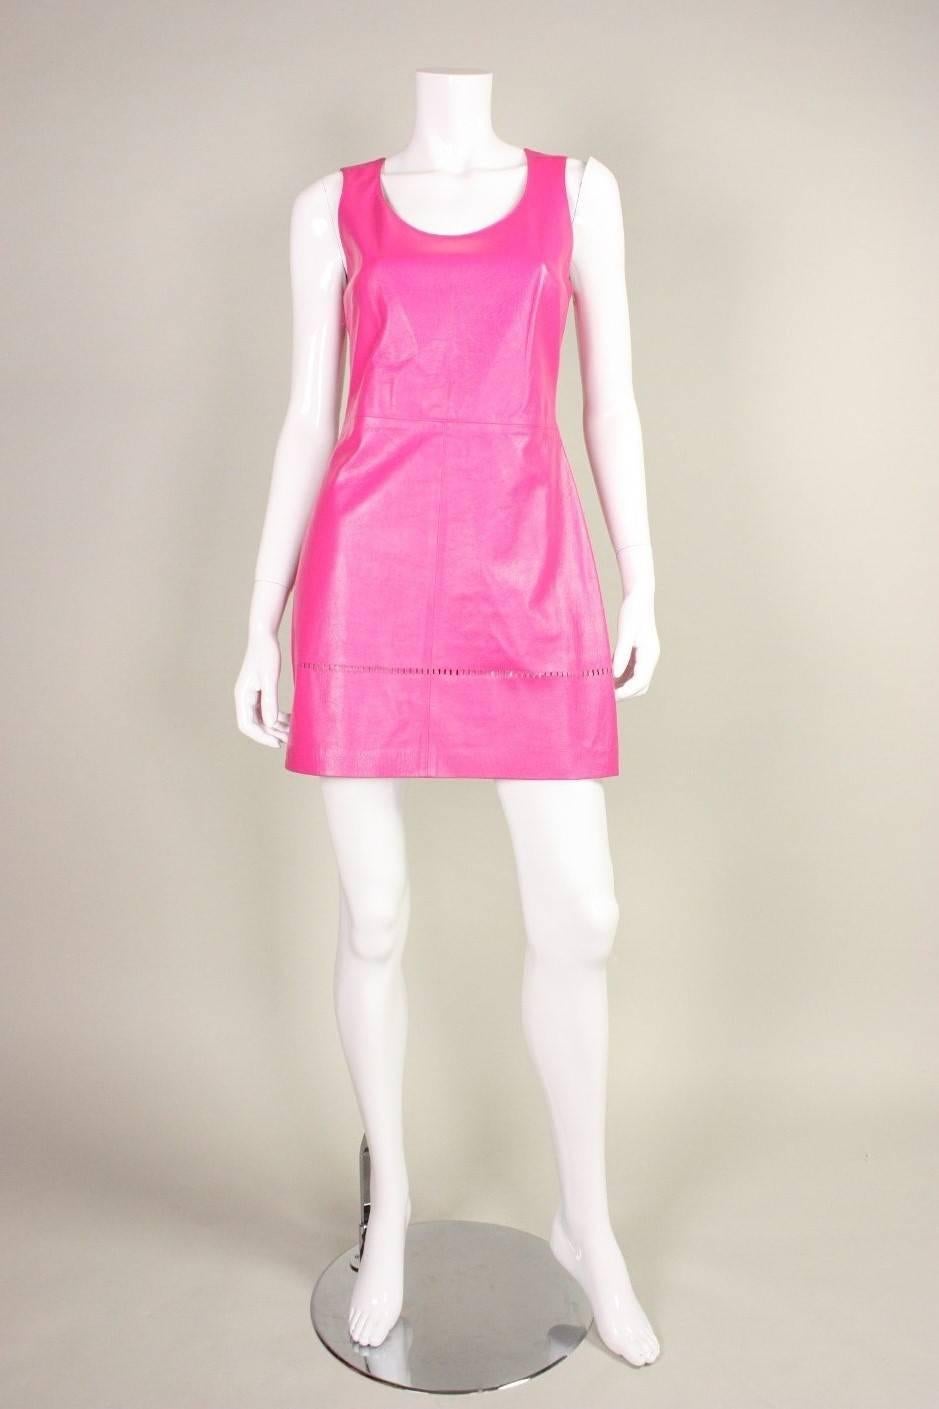 Vintage dress from Gianni Versace's Versus line is made of dark pink buttery-soft leather with perforation detailing at hem.  Scoop neck.  Sleeveless.  Fitted bodice.  A-line skirt.  

Labeled a vintage size 42, which would be best suited for a